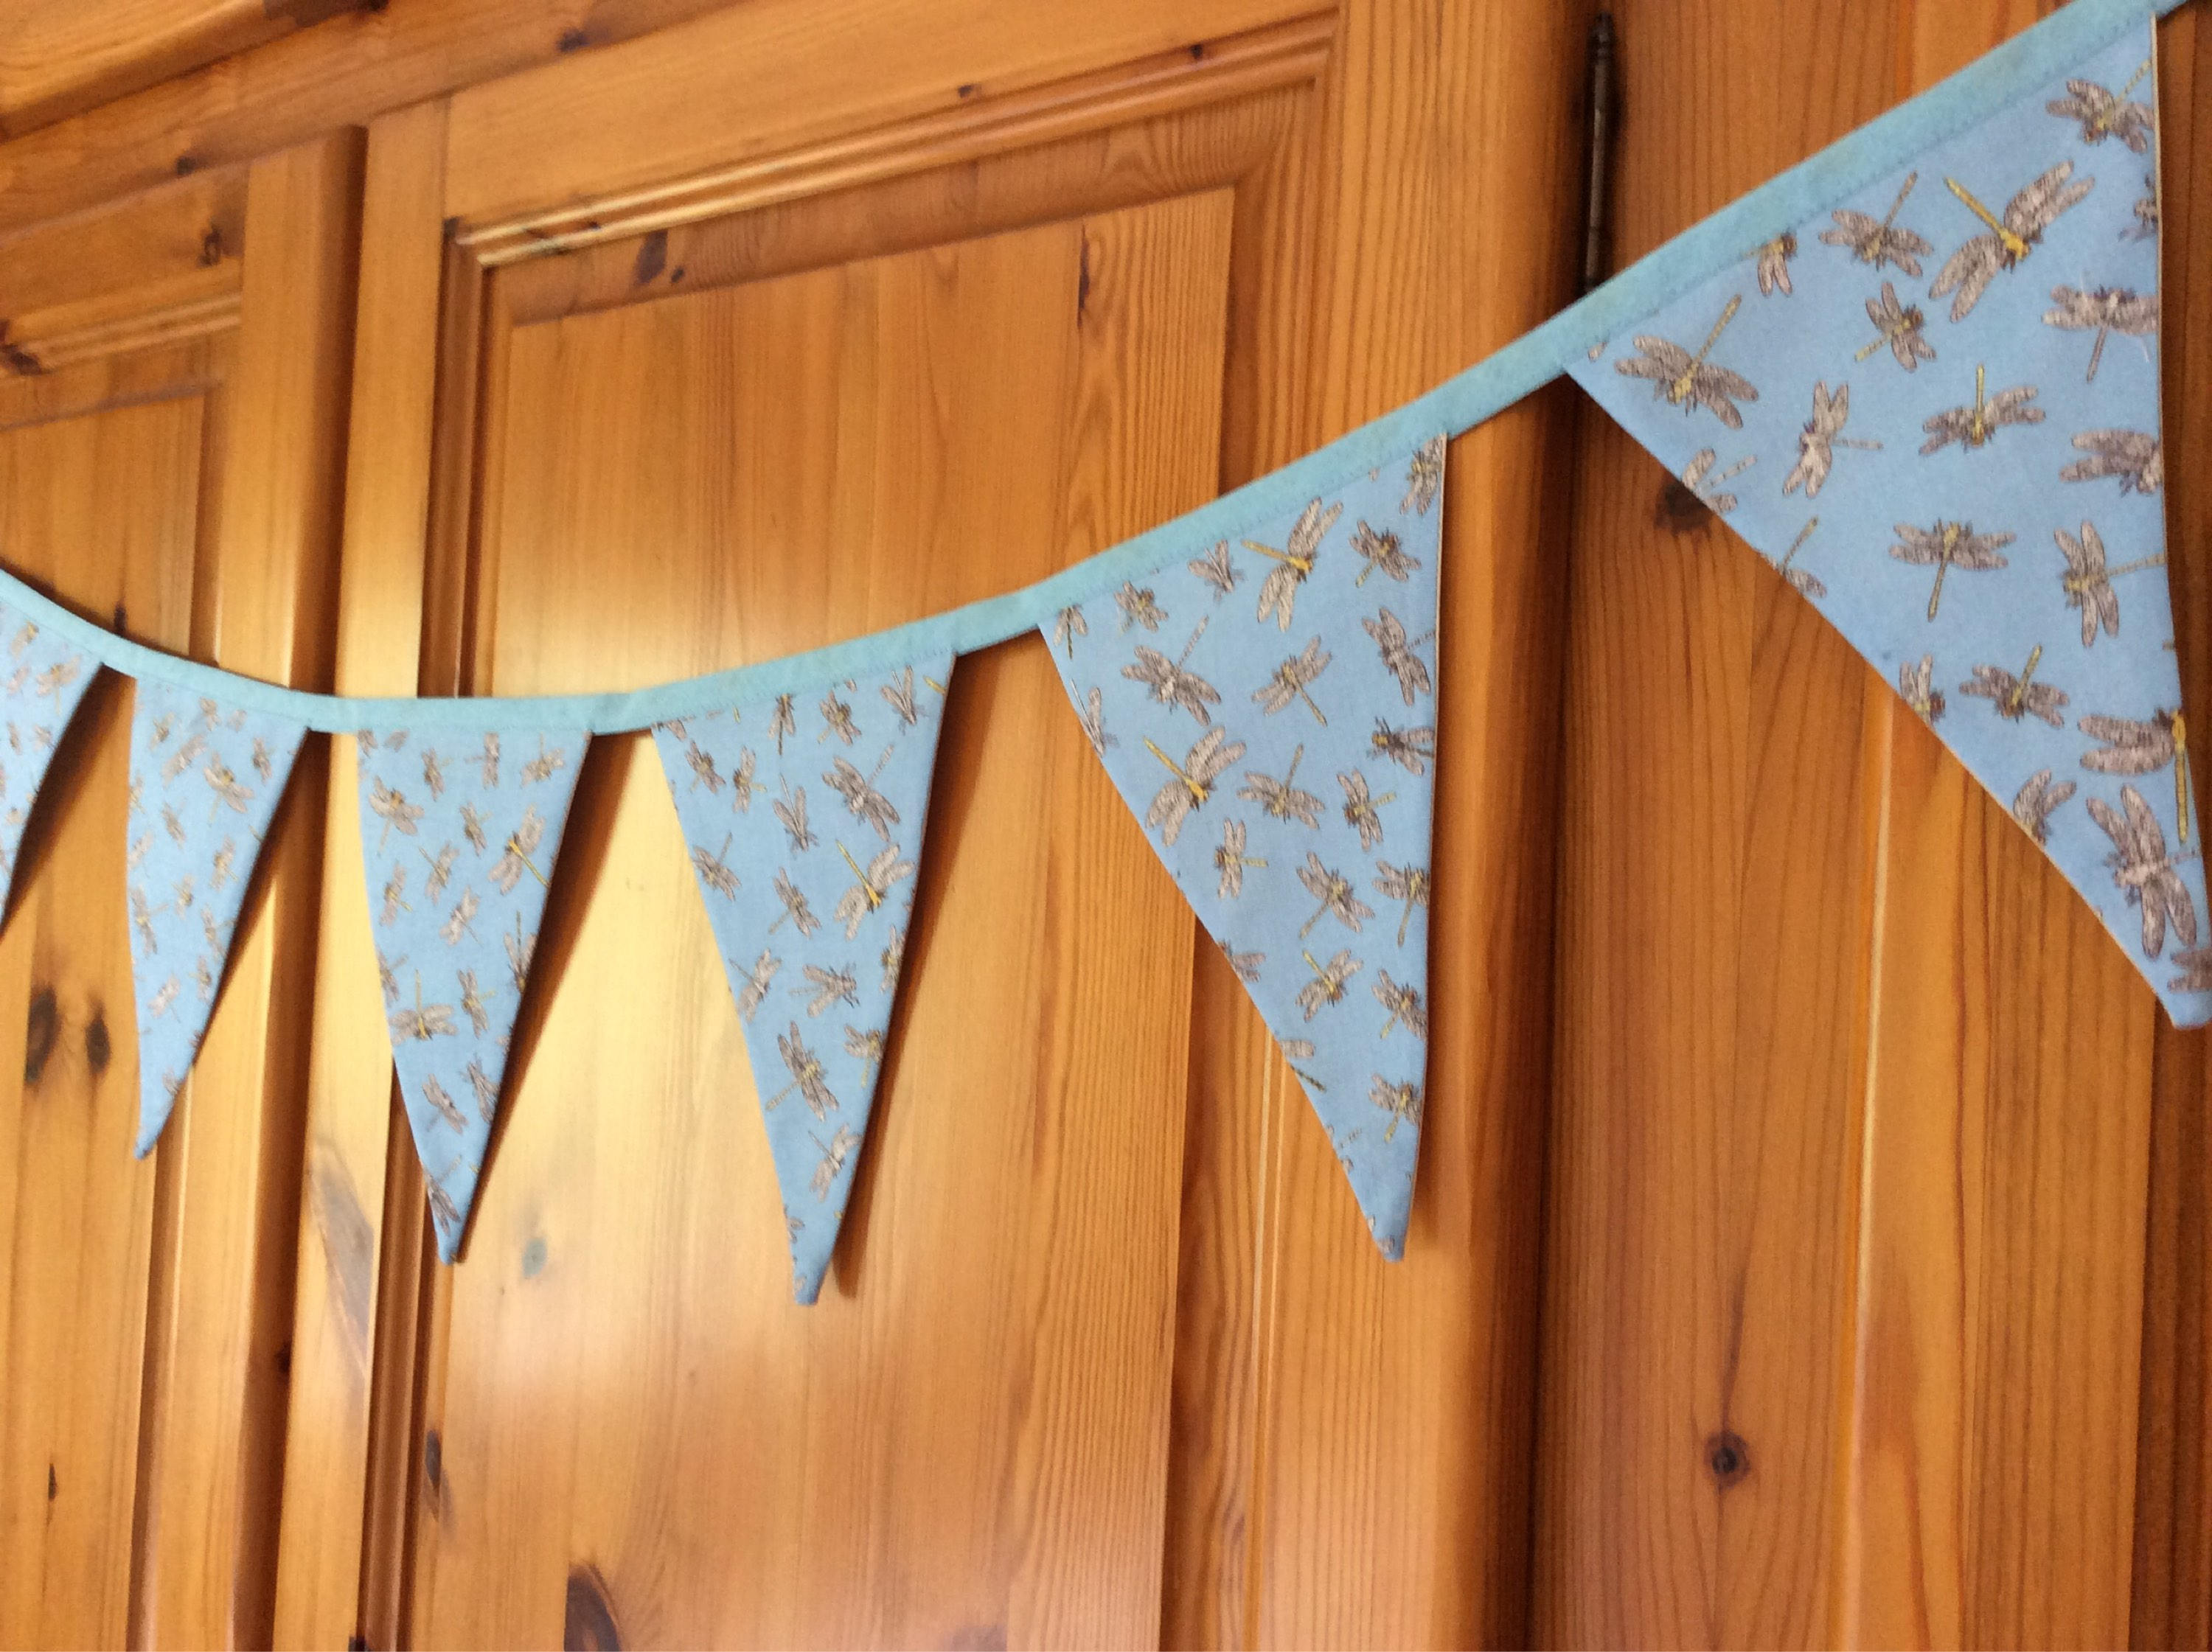 Bunting - dragonflies (9 flags)